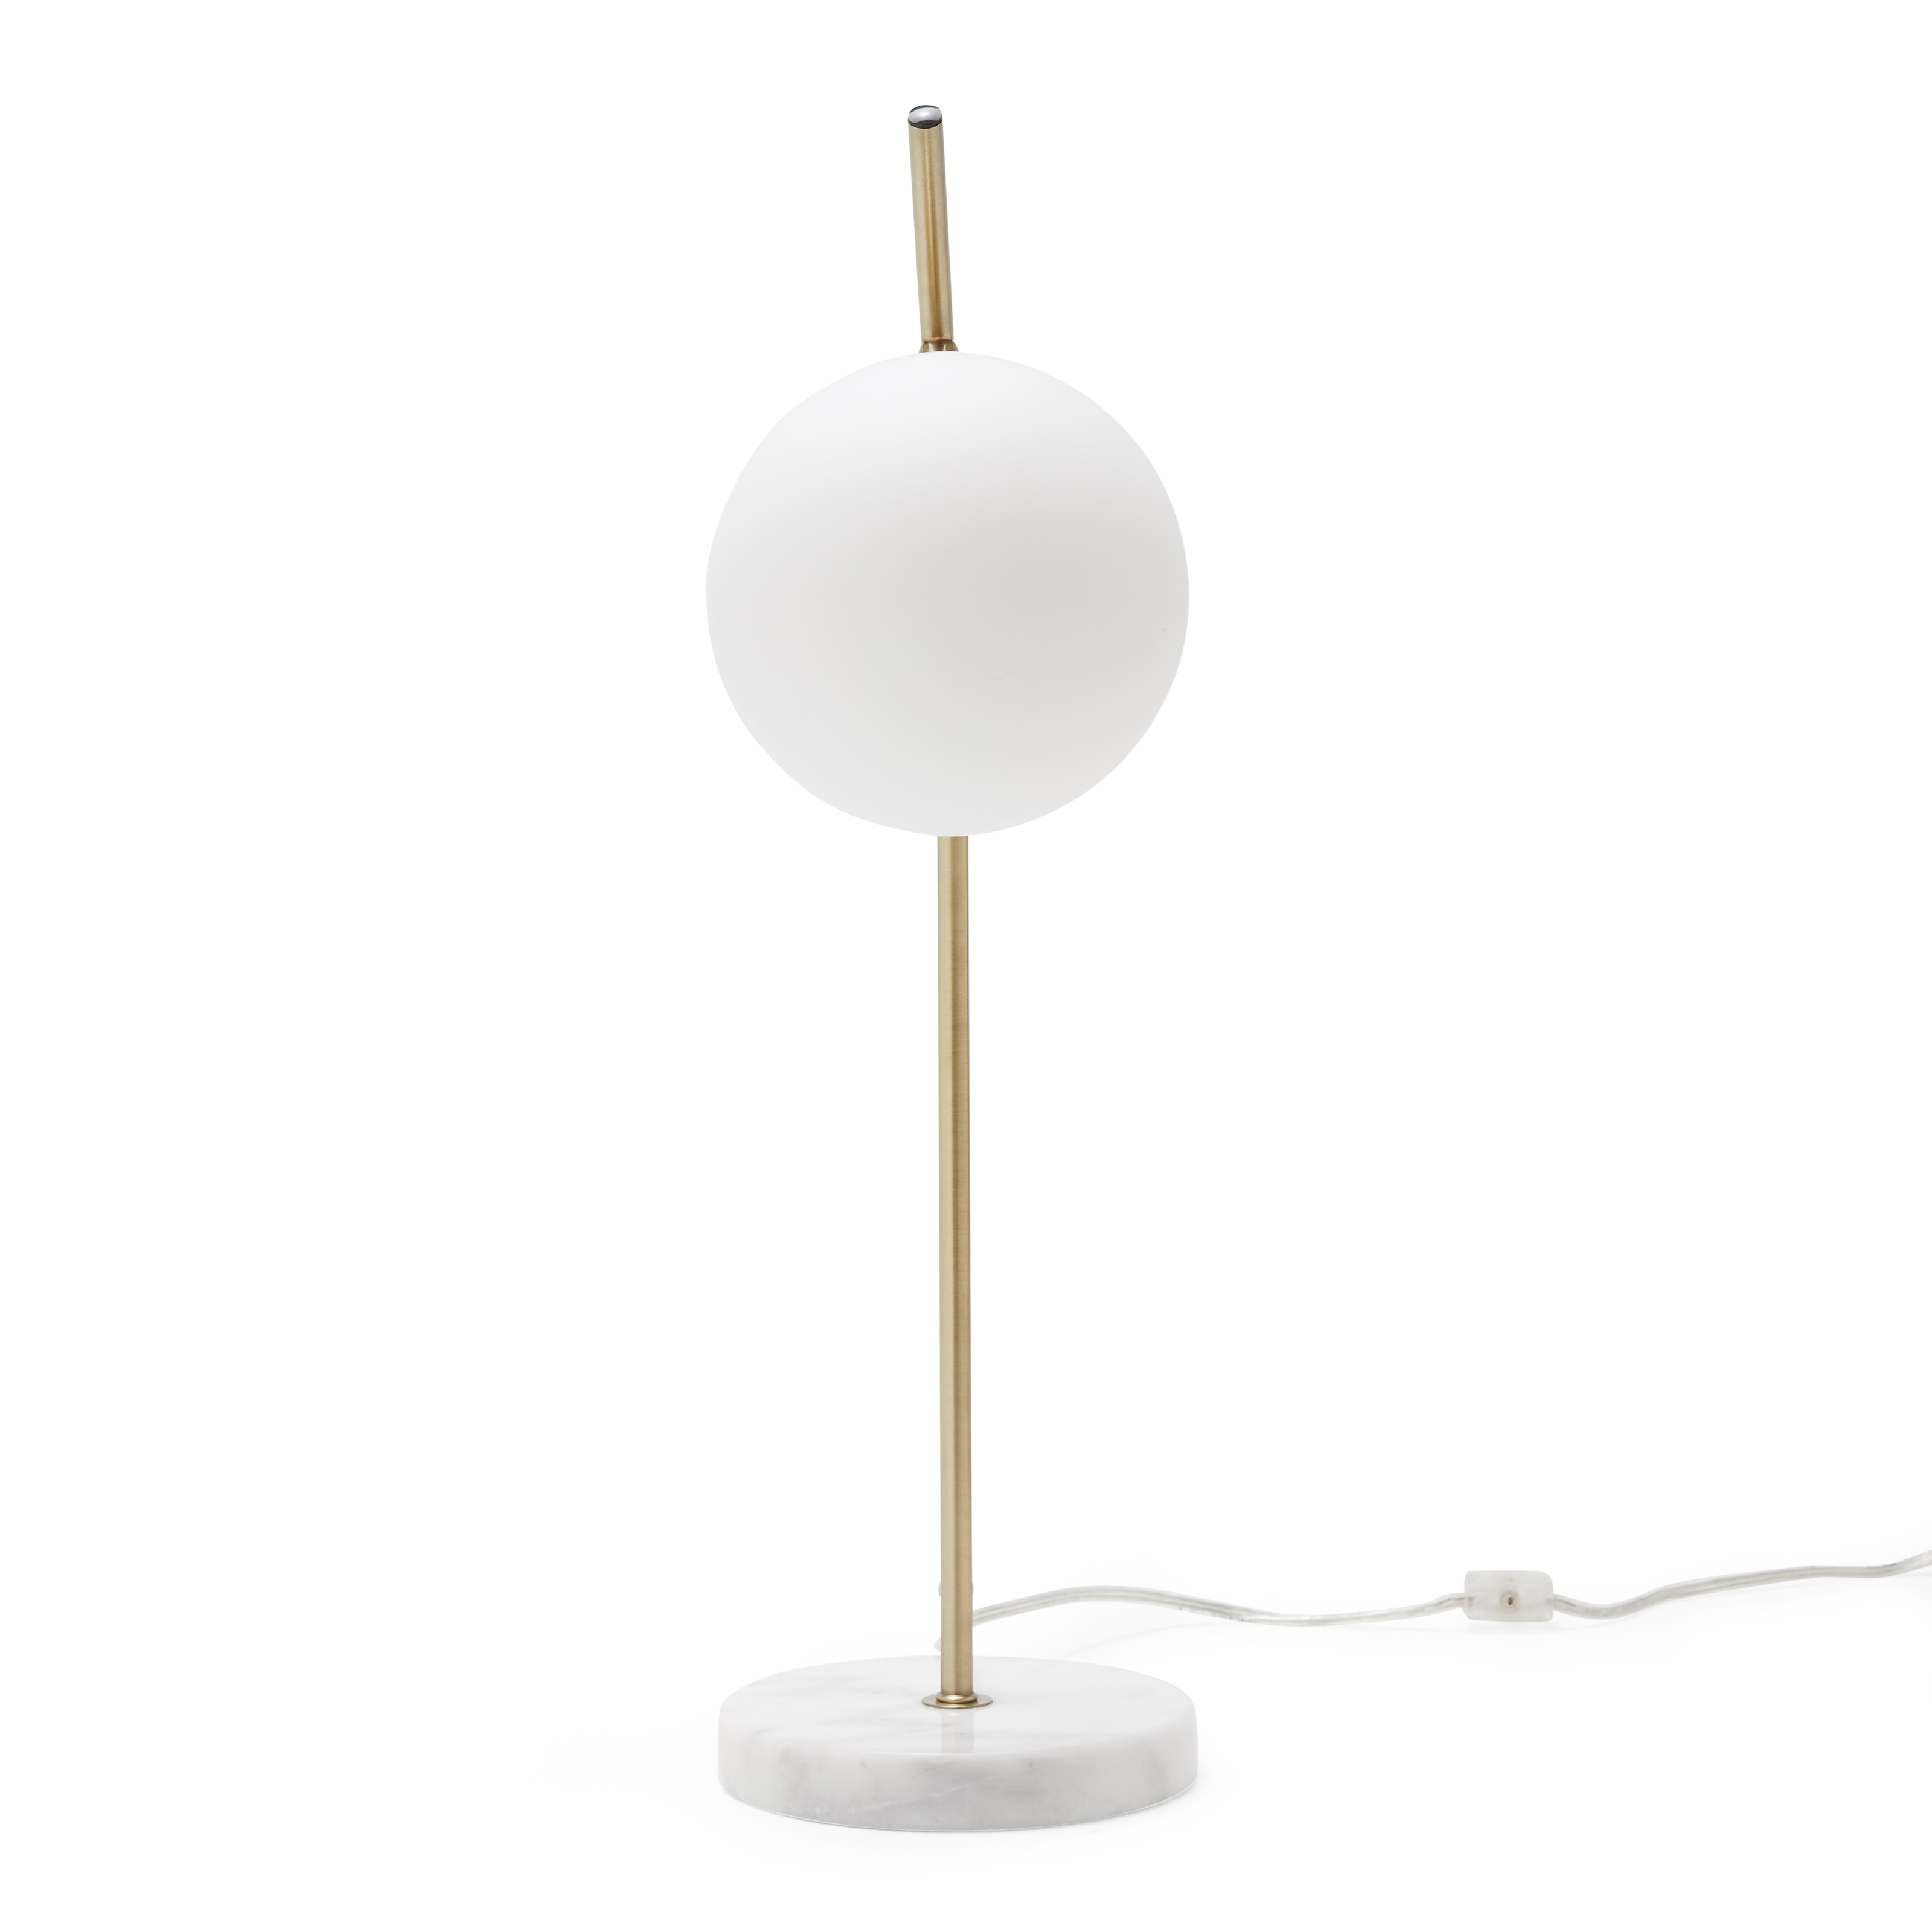 MoDRN Glam White and Antique Brass Marble Desk Lamp, LED Bulb Included - image 2 of 5